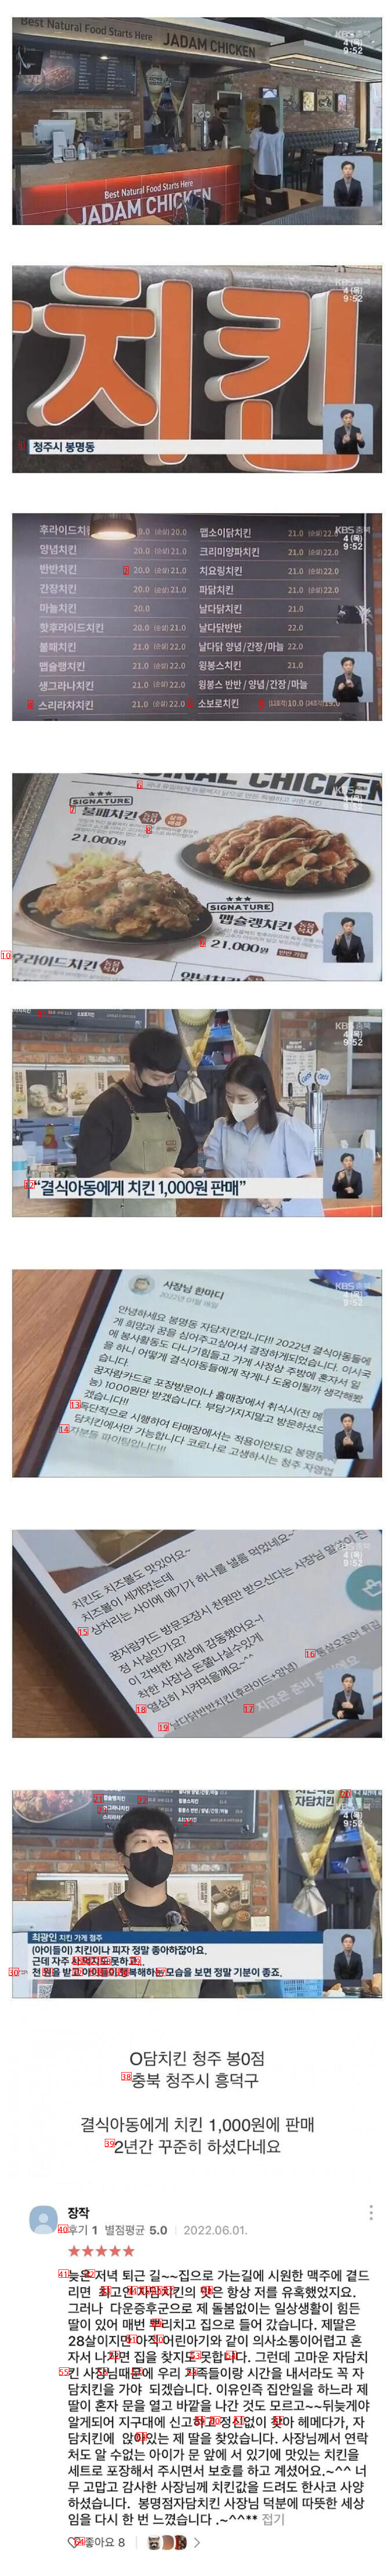 The owner who sells chicken to a specific person for 1,000 won